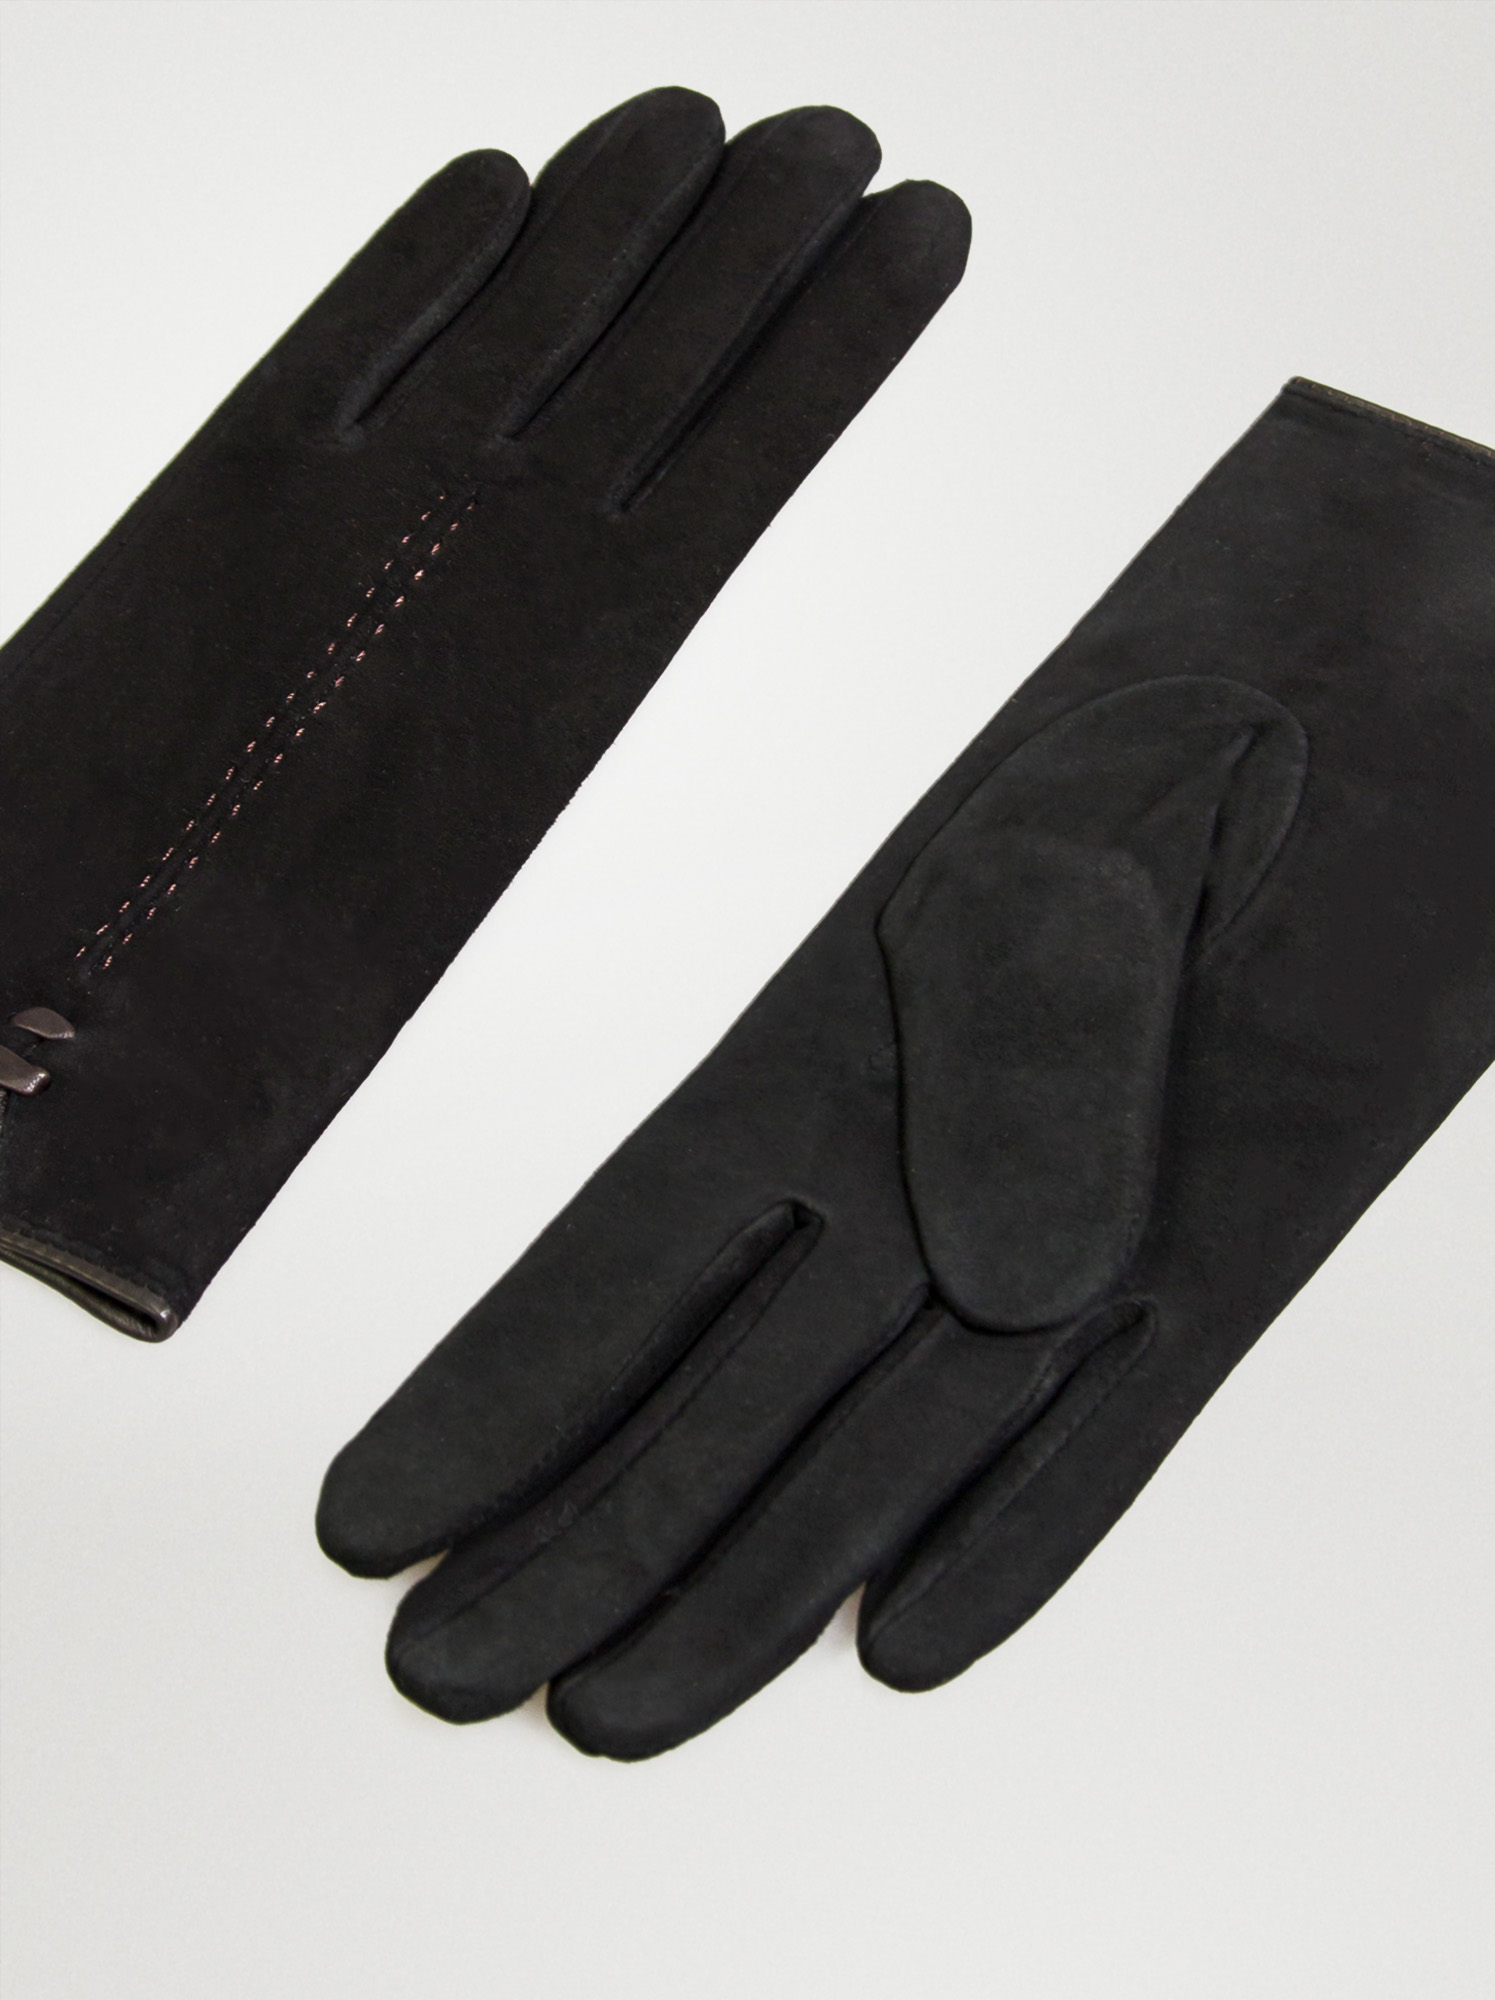 Leather gloves - Allora image 4